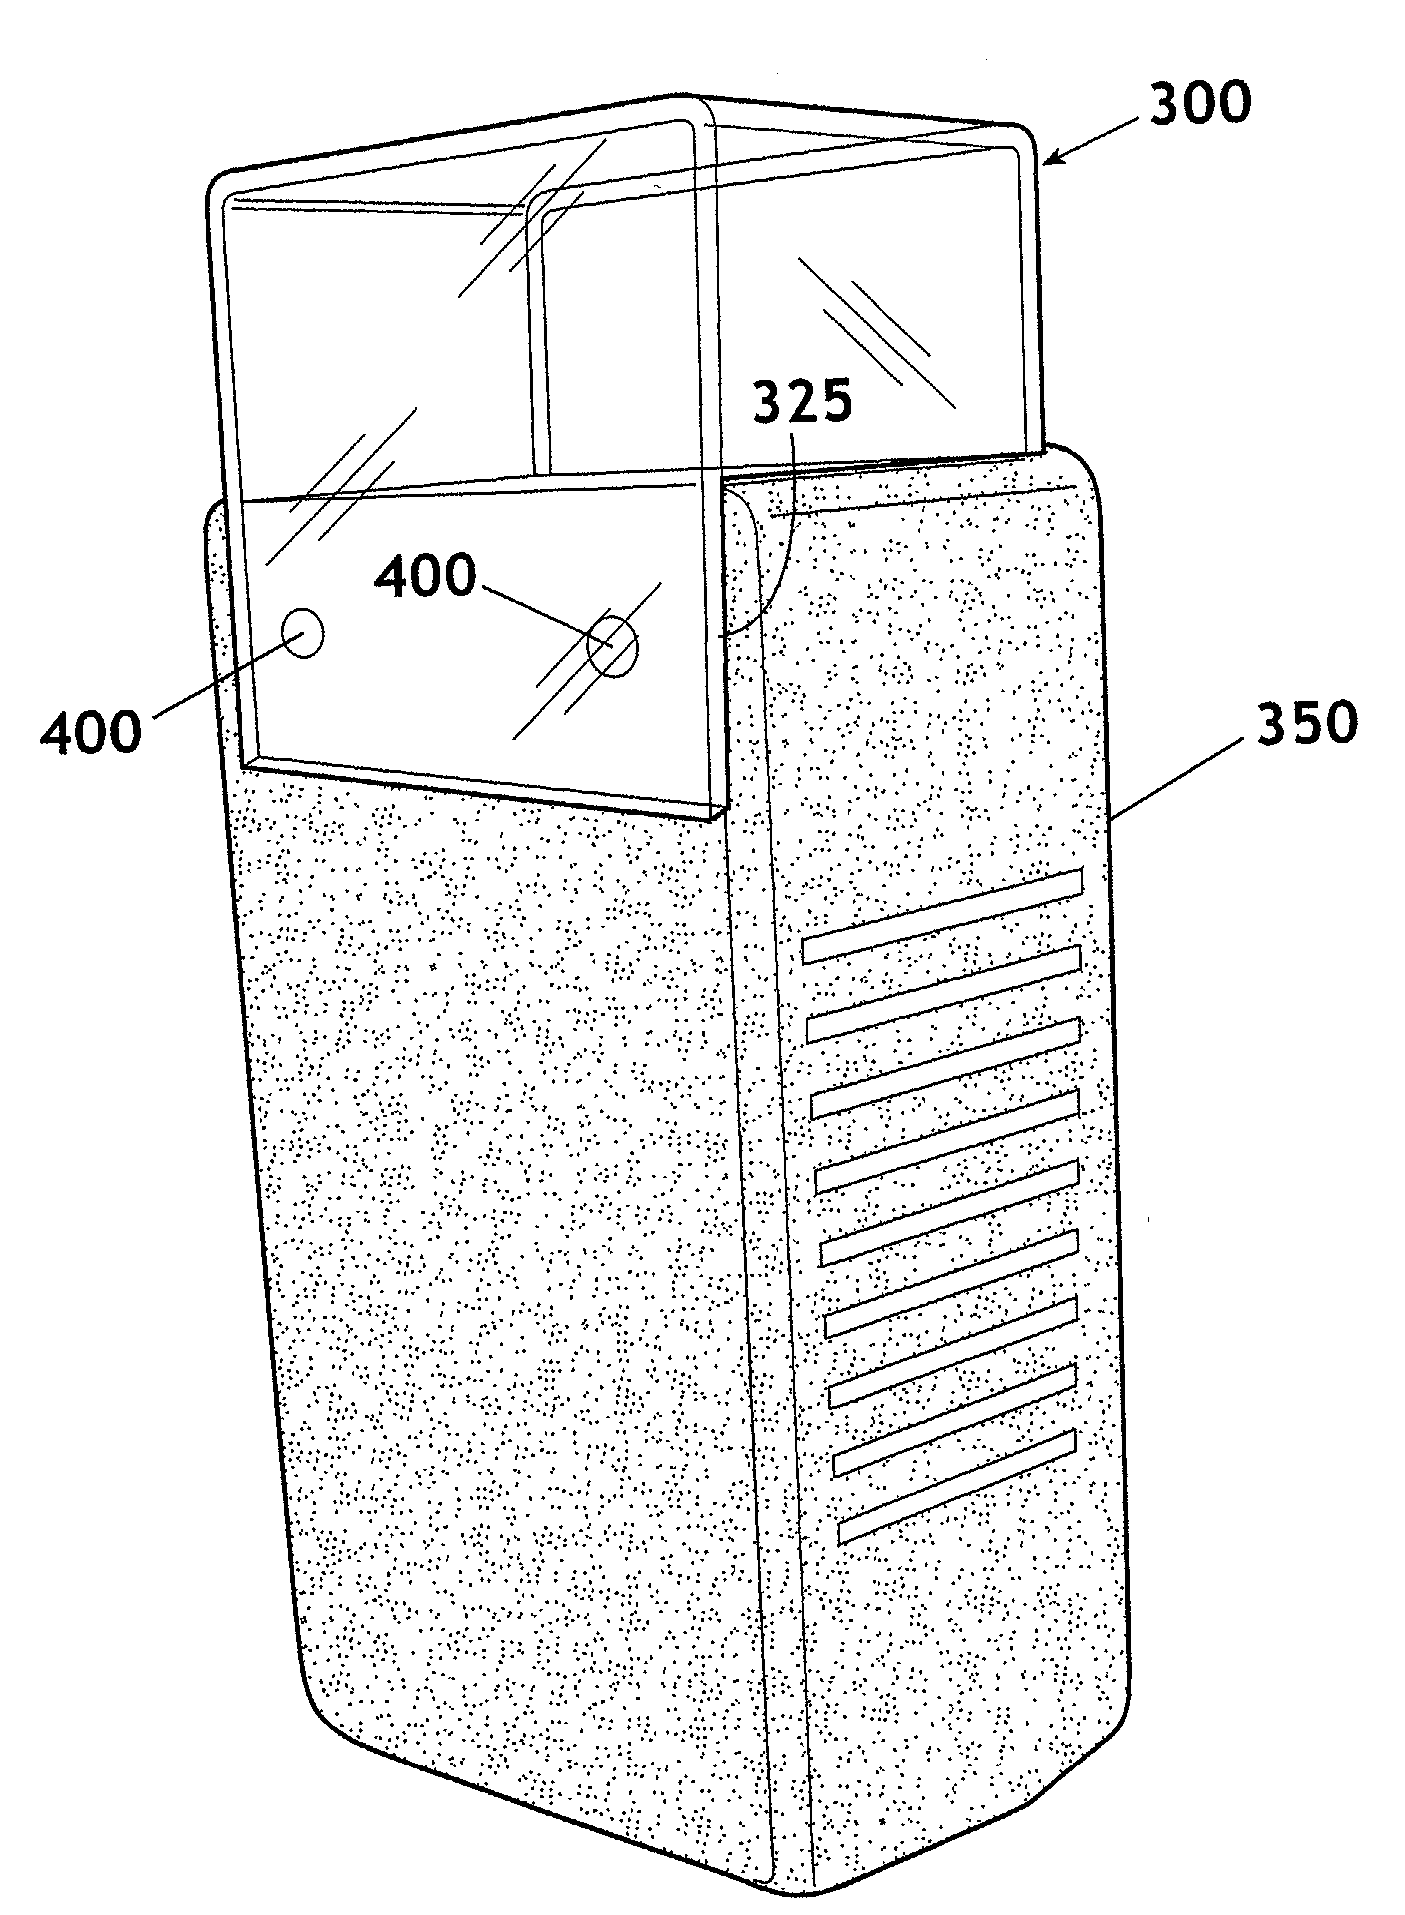 Apparatus for lighting a patient monitor front panel